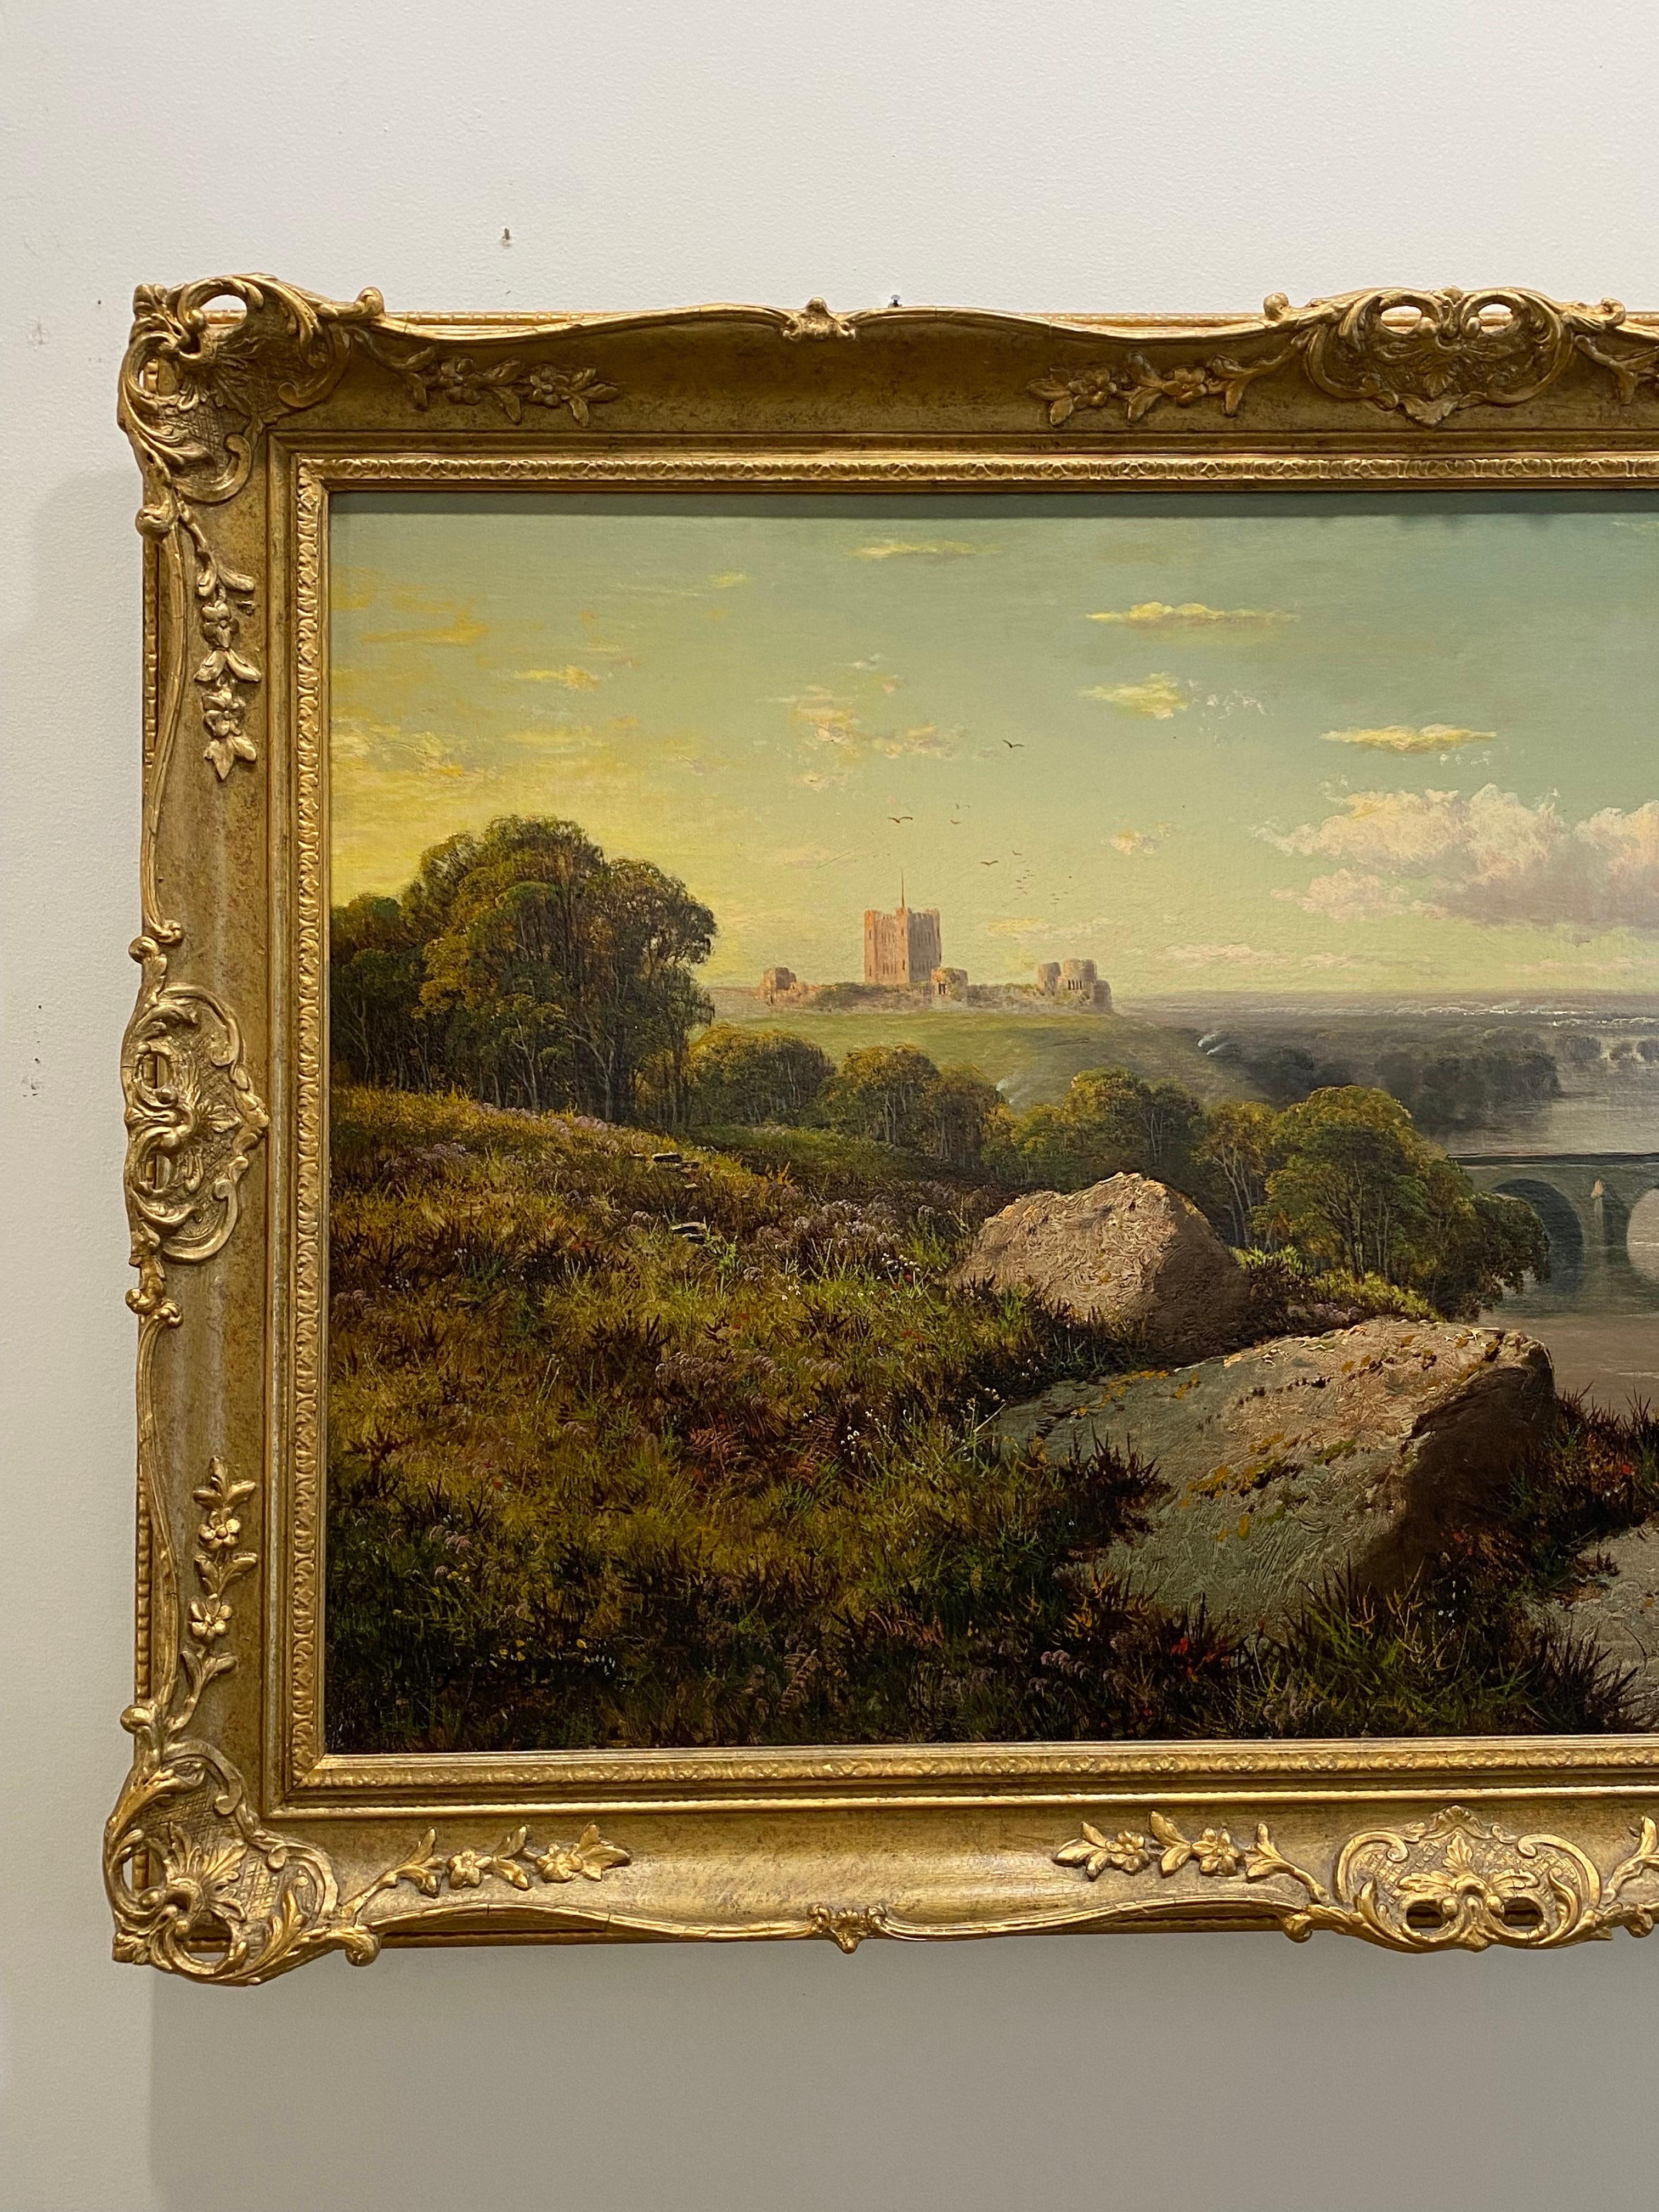 Hand-Painted The Honorable John Collier, Large Landscape Painting For Sale